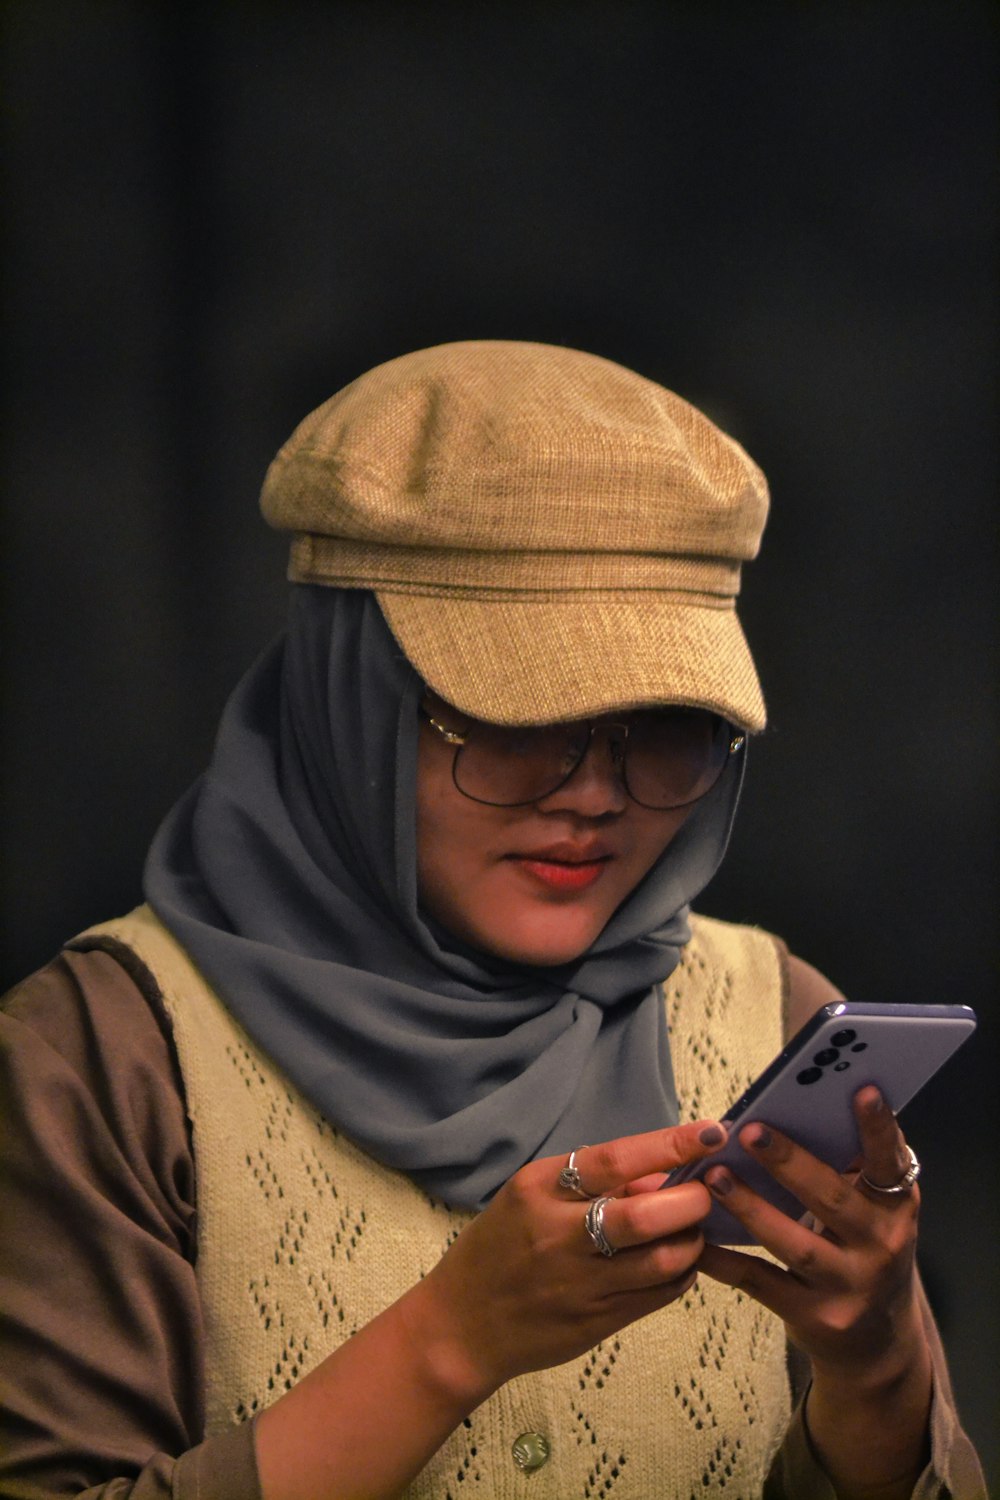 a man wearing a hat and glasses holding a phone